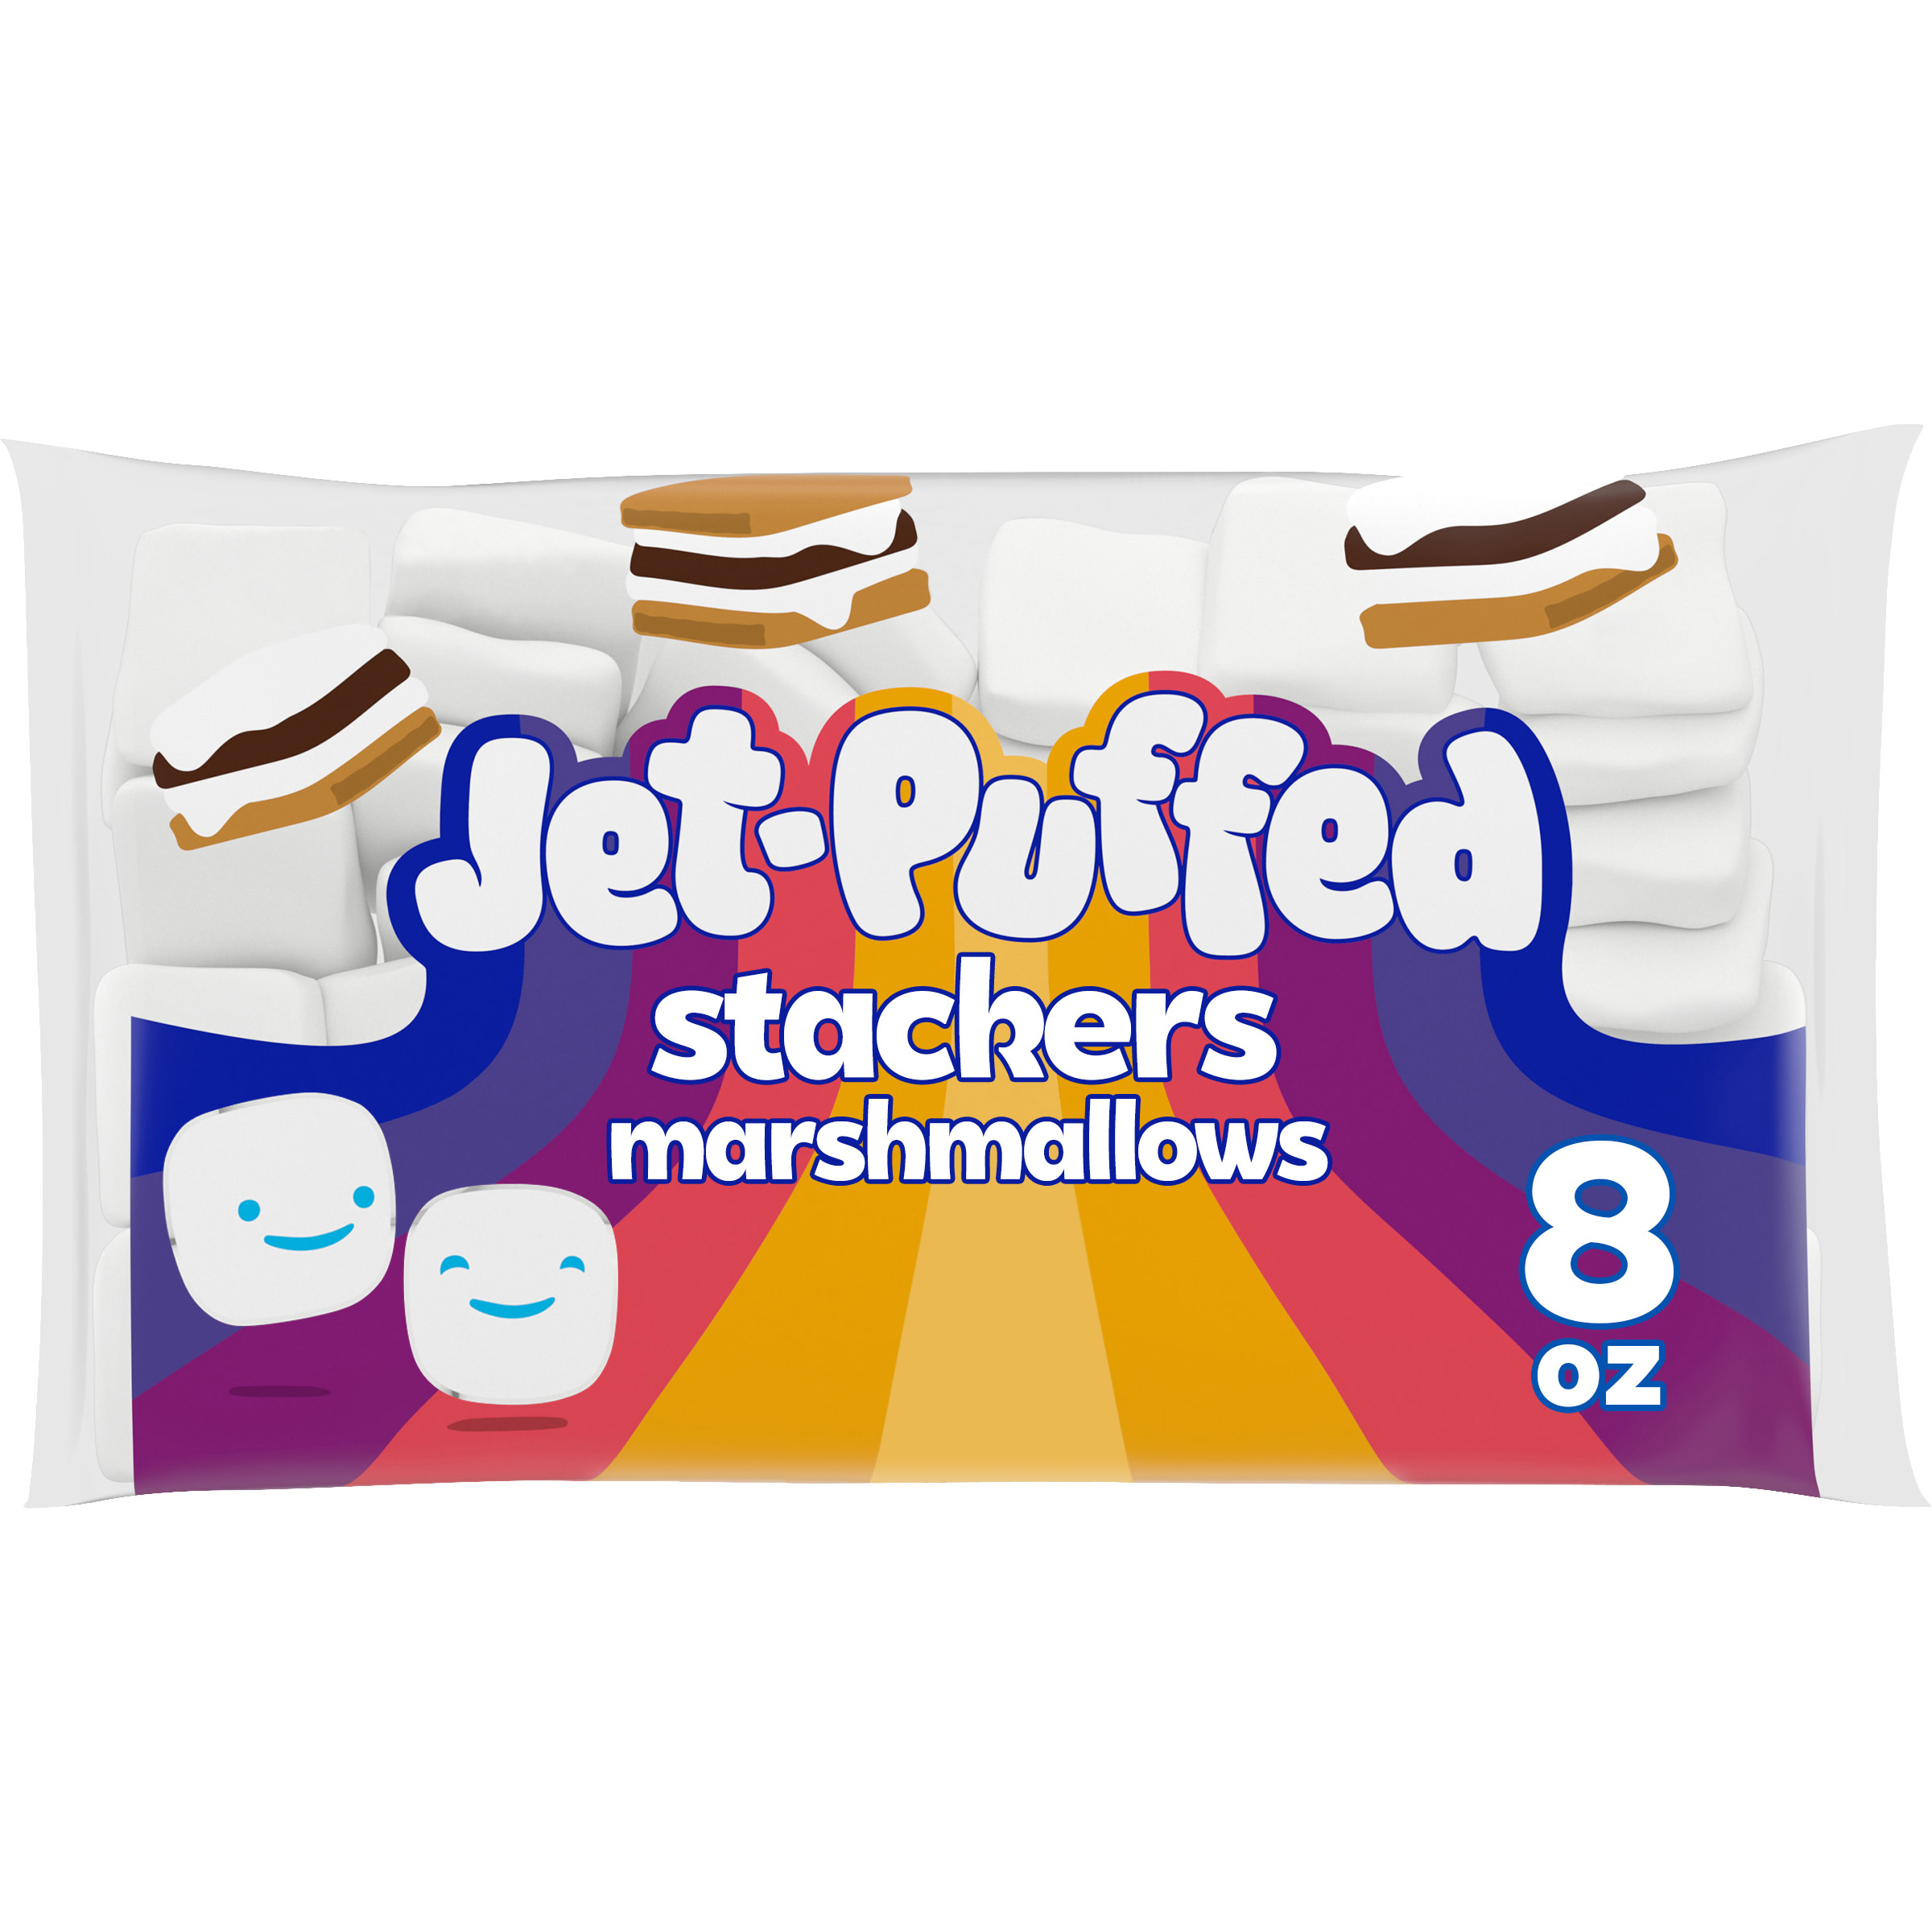 Jet-Puffed Stackers Marshmallows, 8 oz. Bag - image 1 of 16